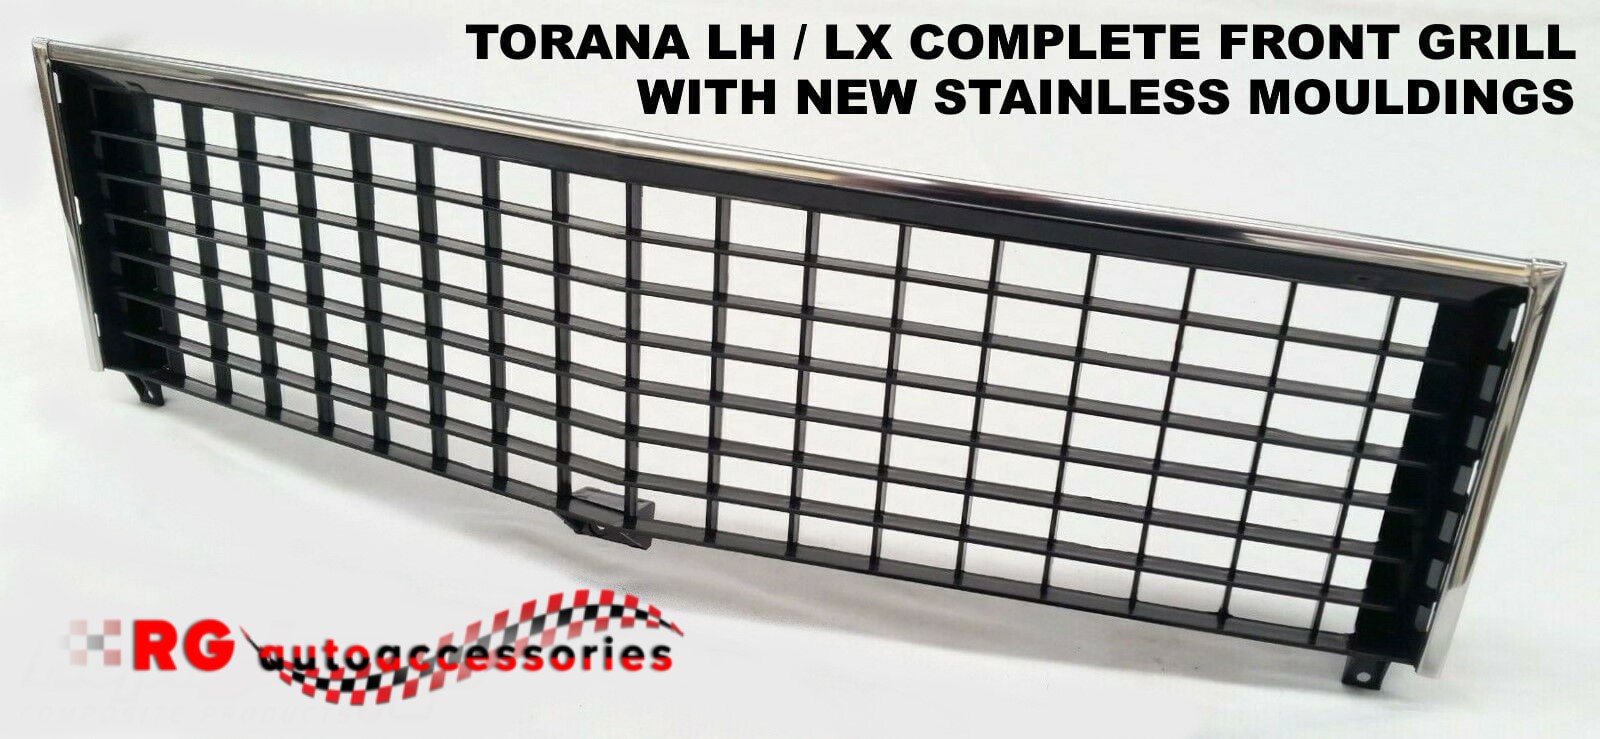 HOLDEN TORANA LH – LX SLR/5000 SS A9X SL FRONT GRILL PLASTIC AND 3 PIECE STAINLESS MOULDS TO SUIT SEDAN OR HATCH WITH FREE FREIGHT